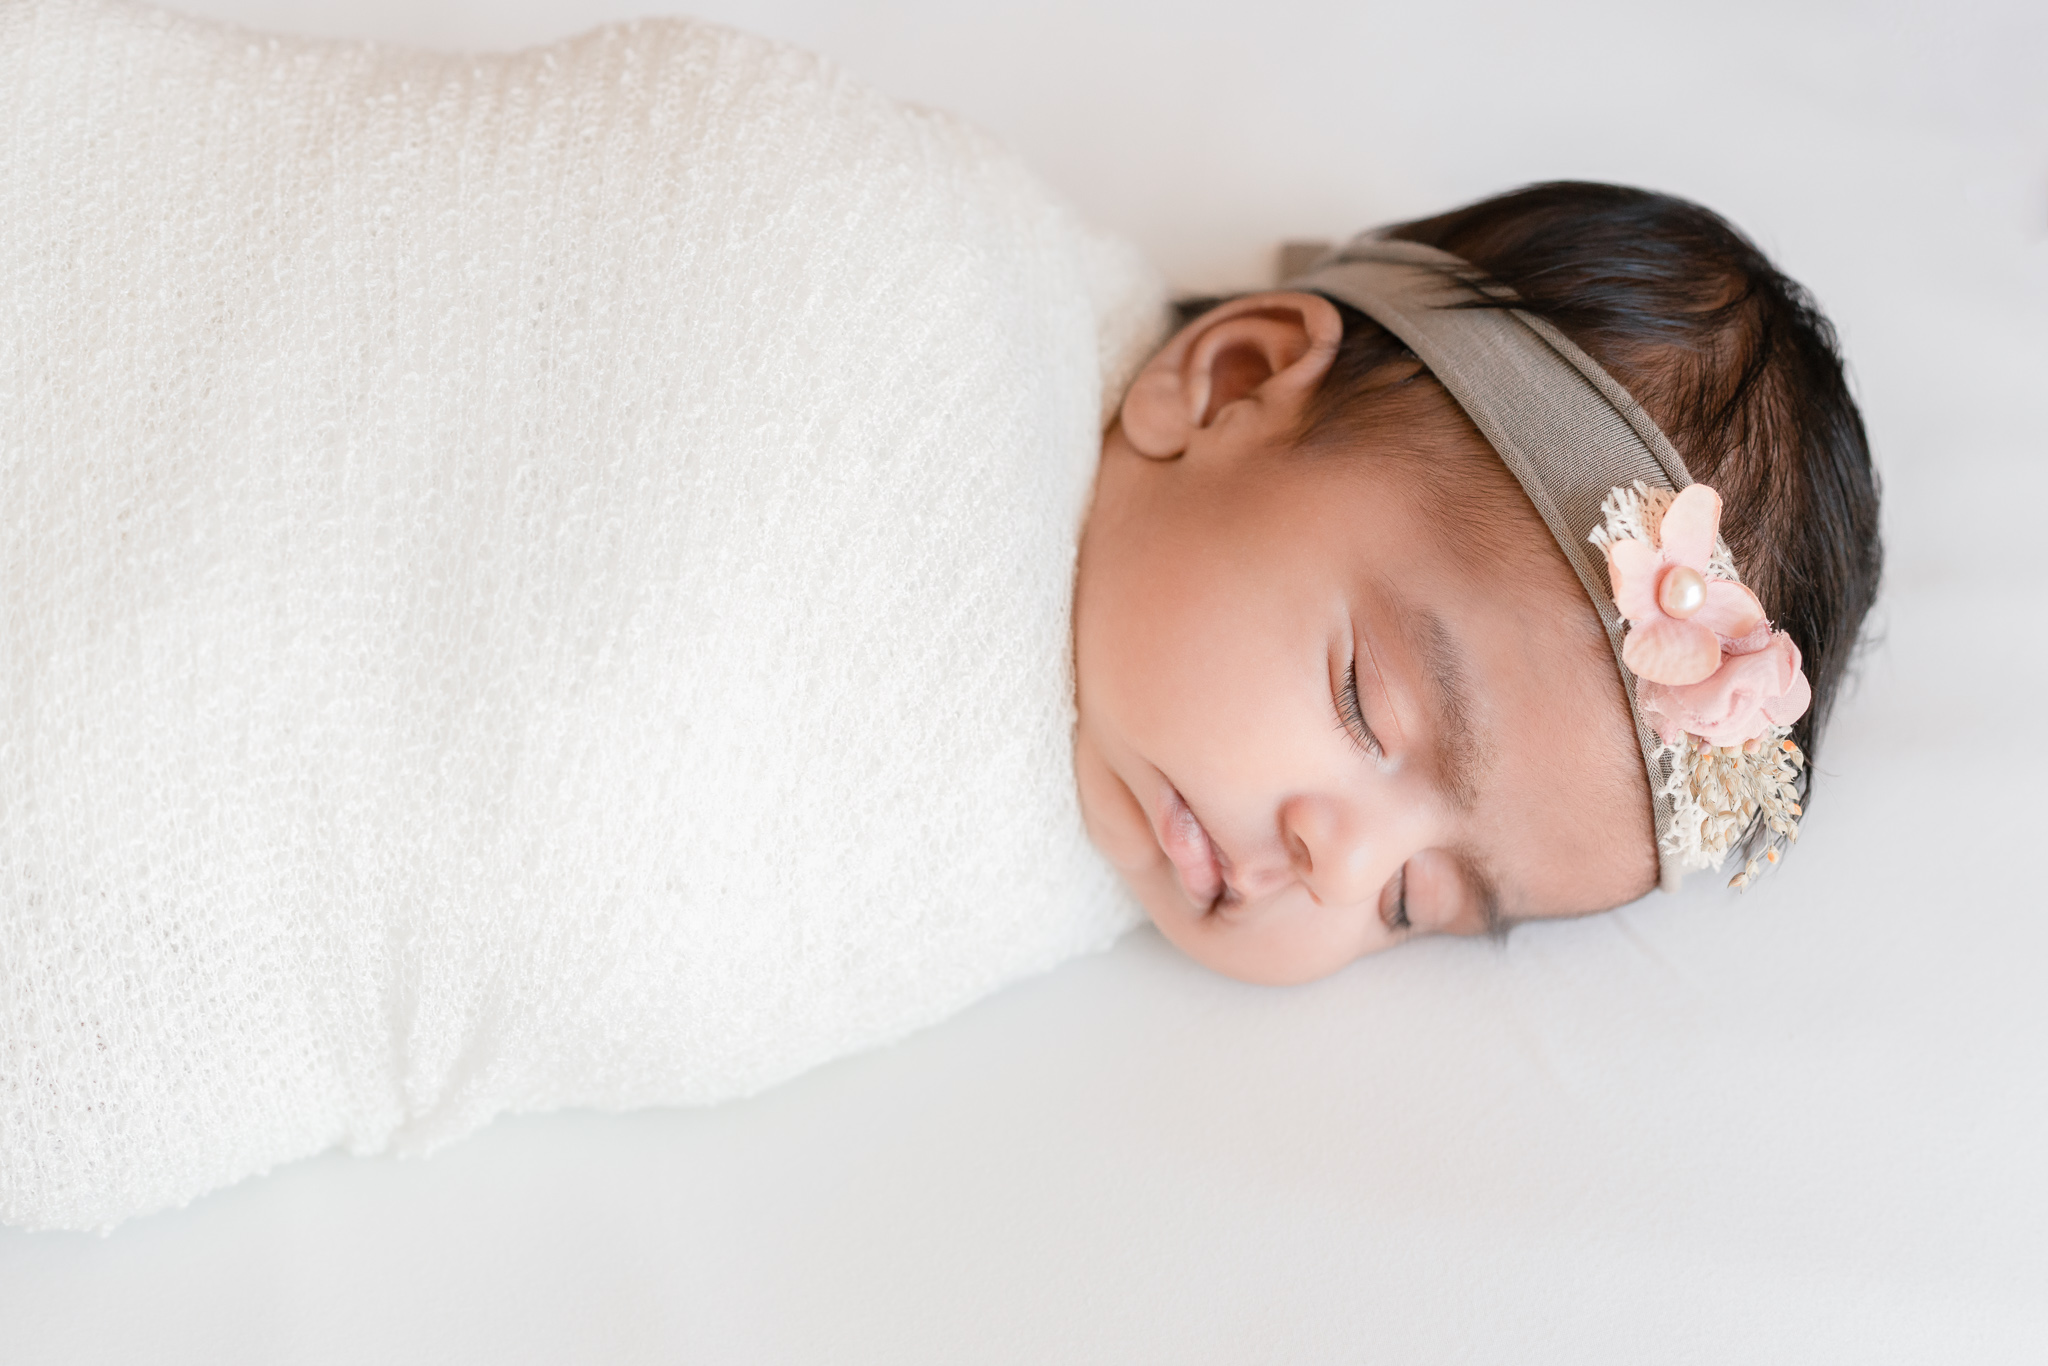 sleeping newborn baby girl swaddled in white with a floral headband